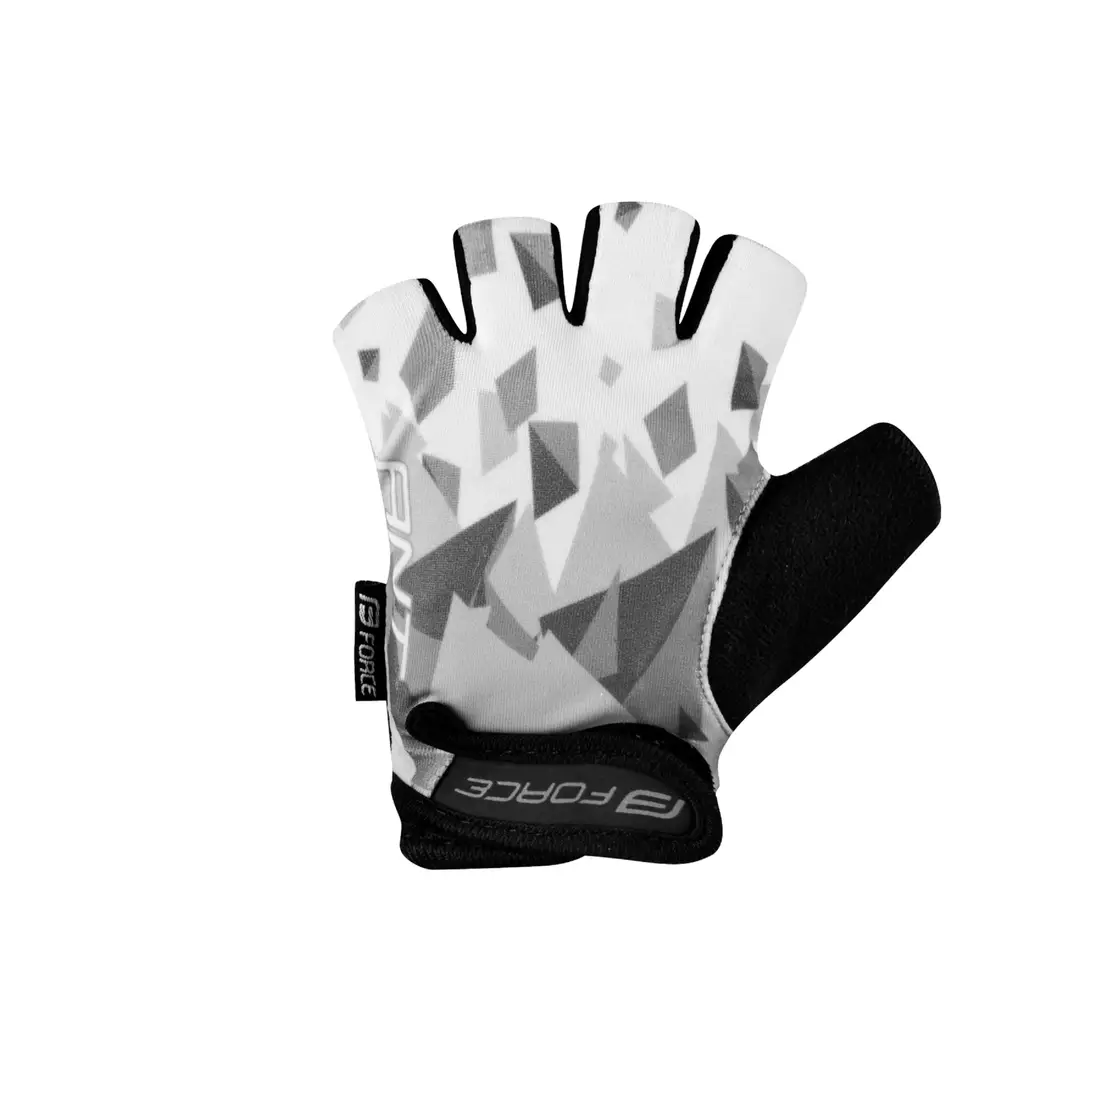 FORCE children's cycling gloves ANT grey/white 9053237